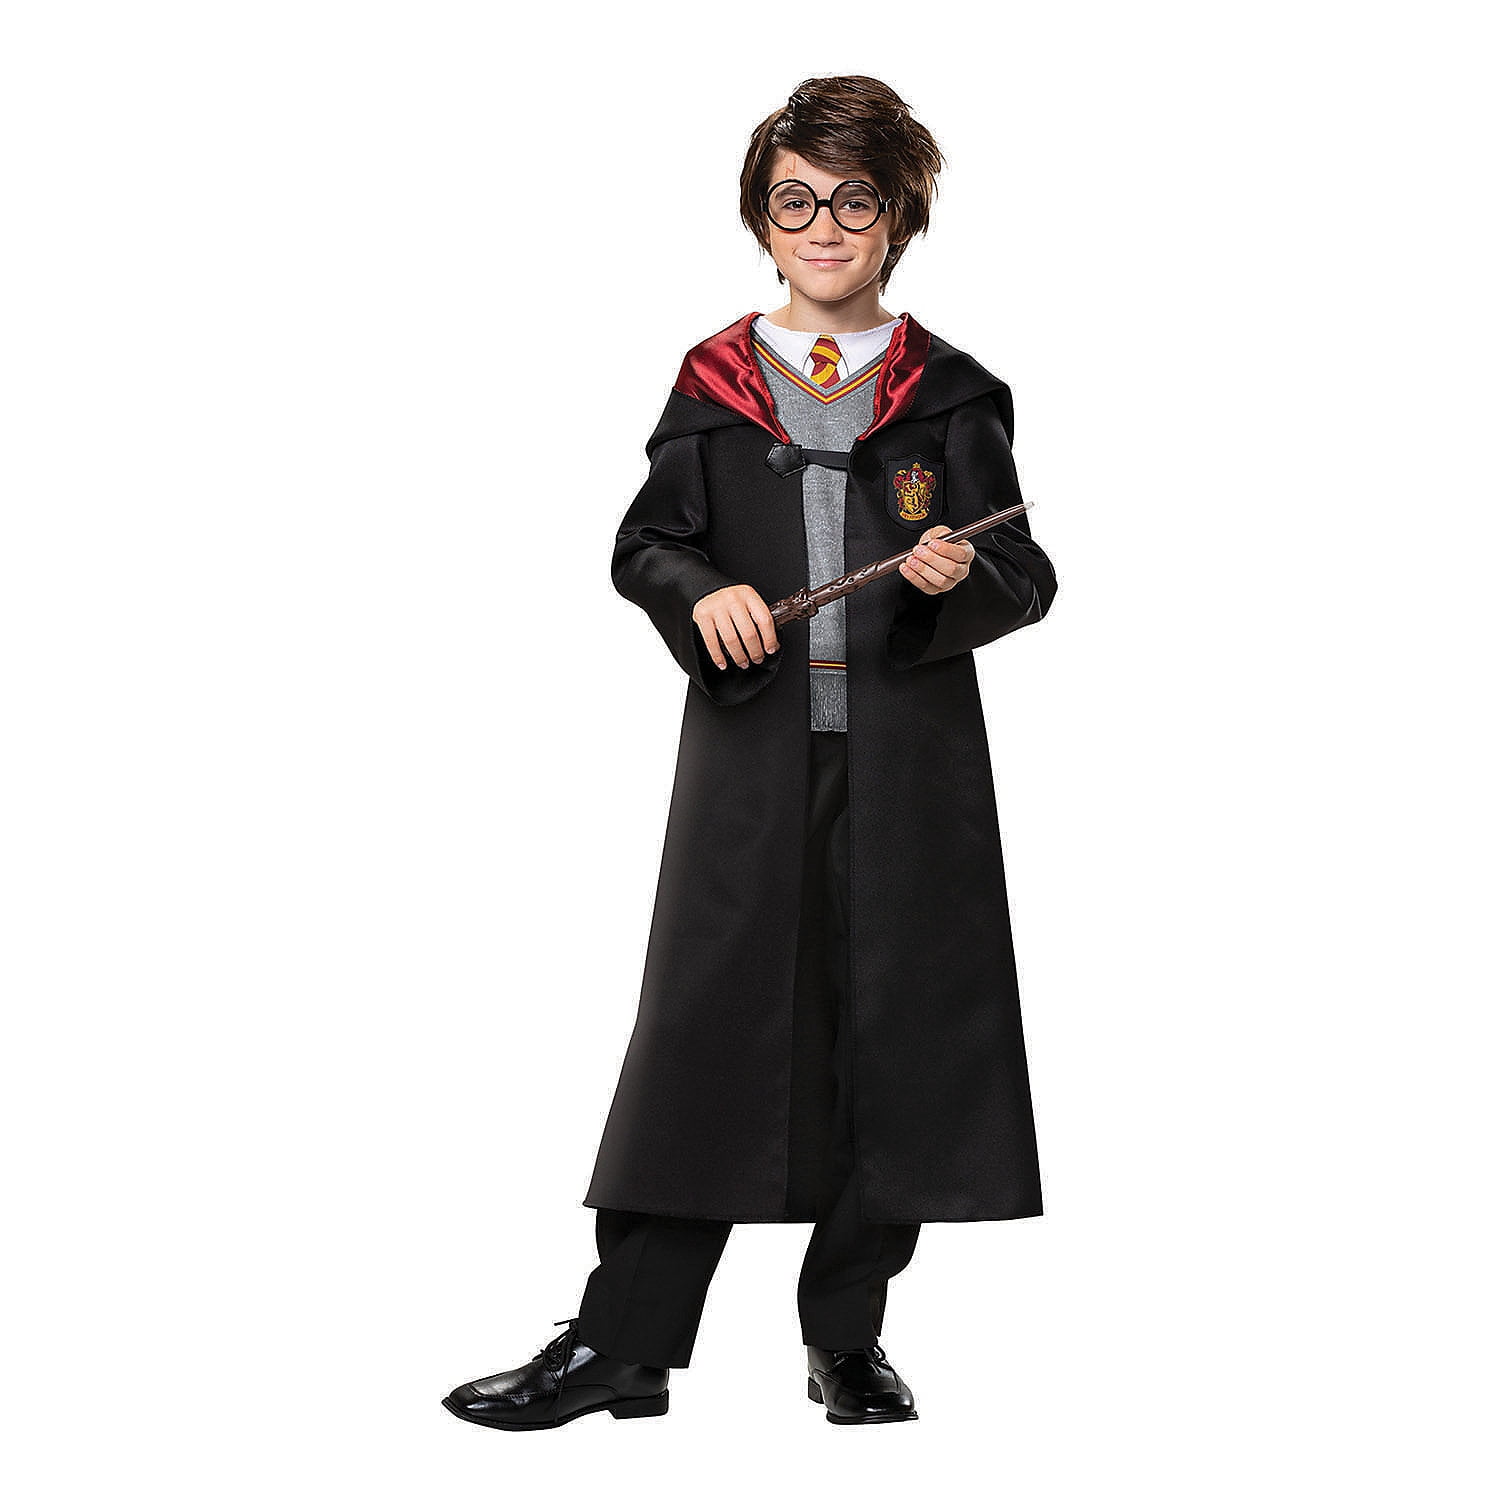 Disguise Boys' Harry Potter Costume - Size 4-6